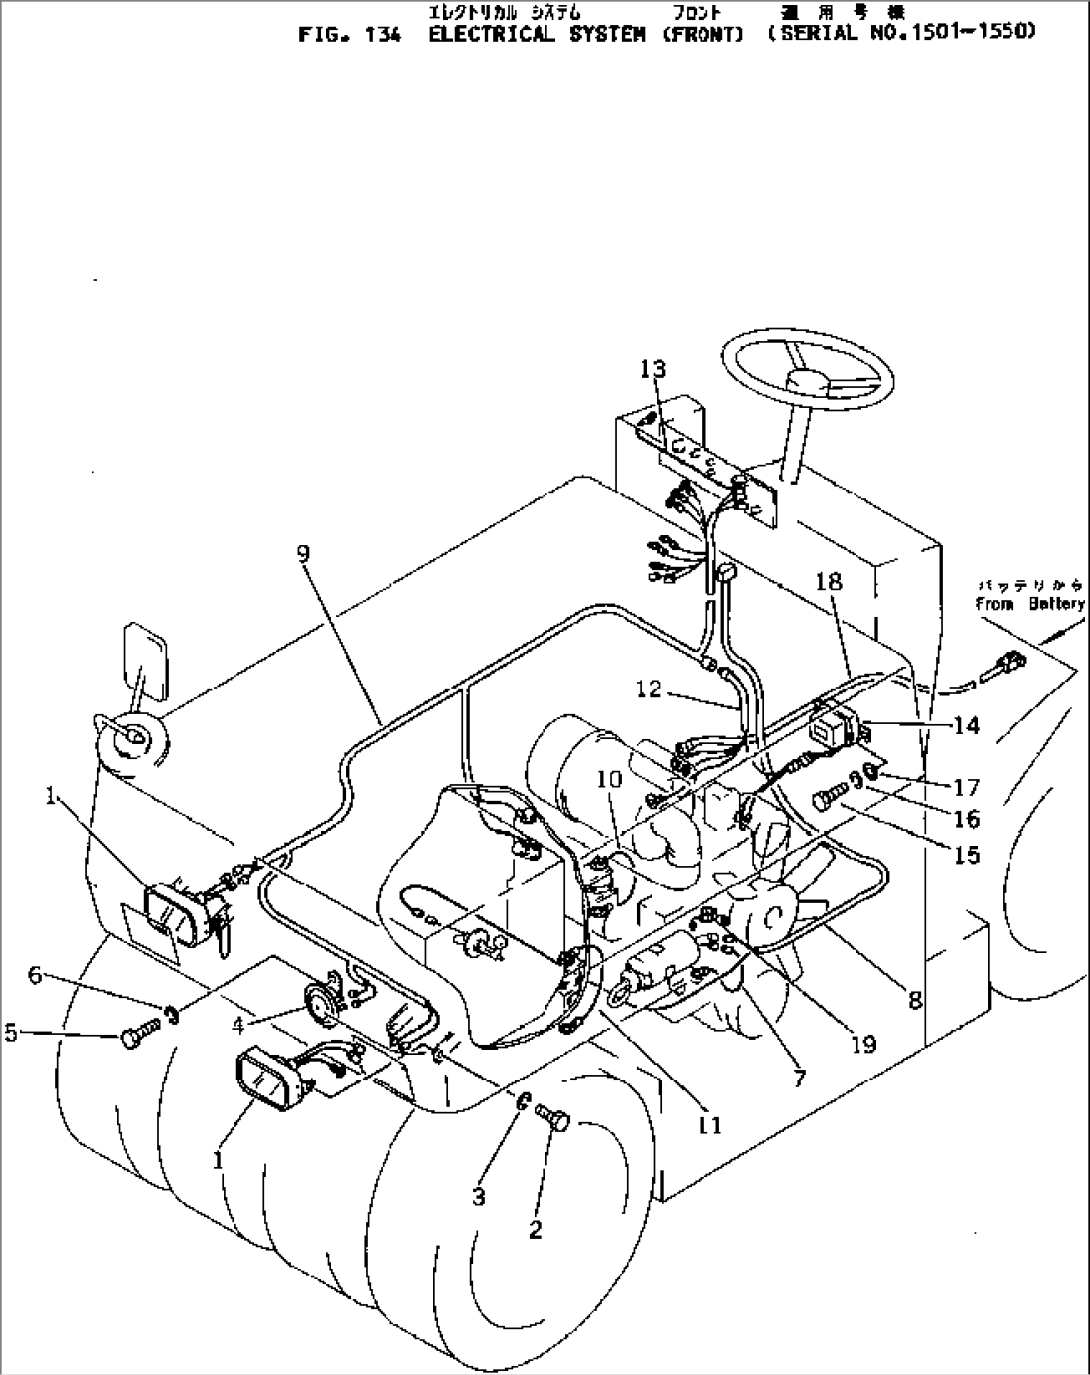 ELECTRICAL SYSTEM (FRONT)(#1501-1550)